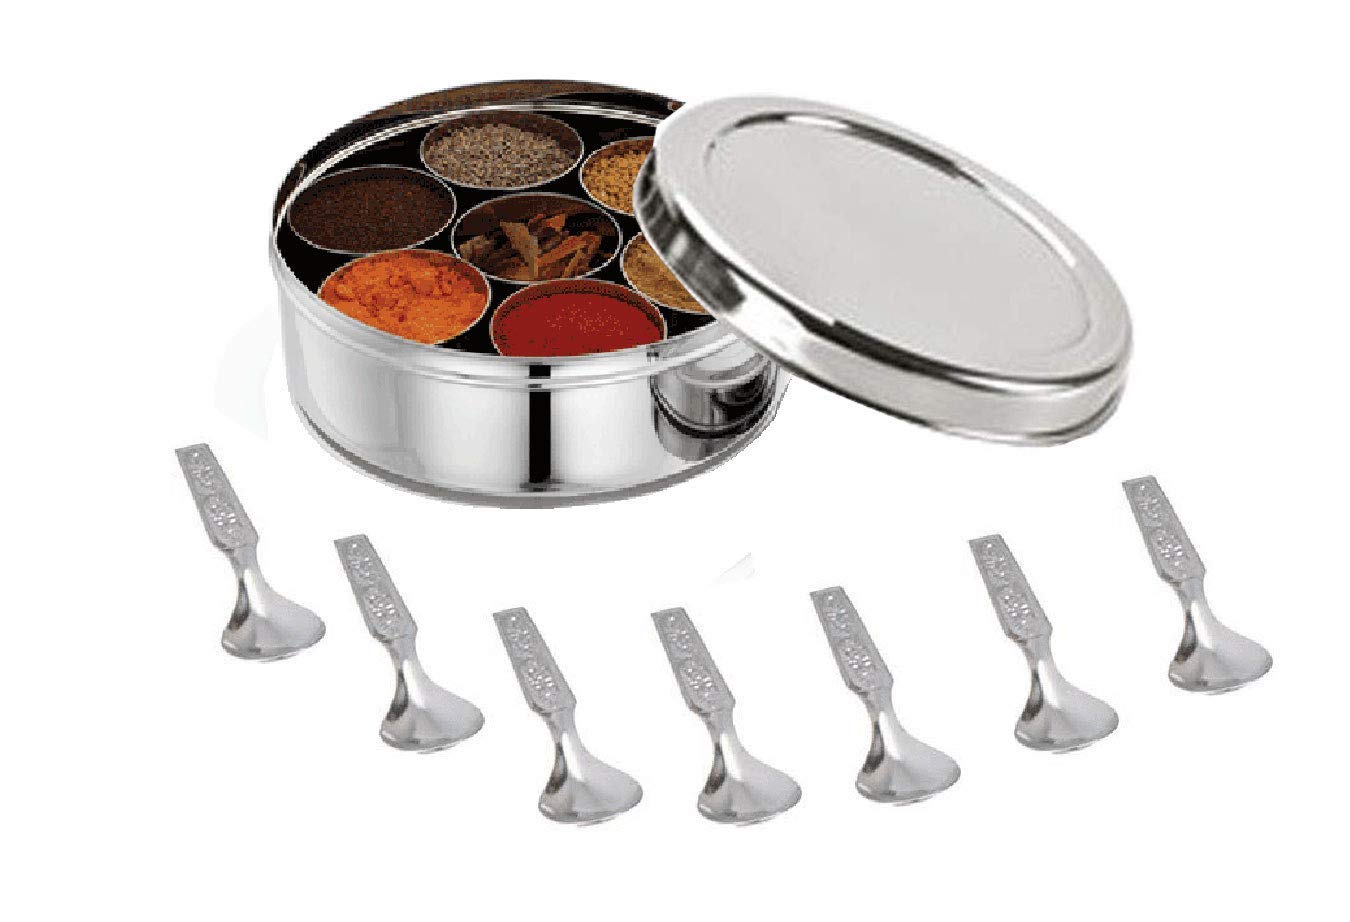 Satre Online and Marketing Stainless Steel Spice Box Without Lid,Stainless Steel Masala Box,Indian Spice Box with 7 Spice contai